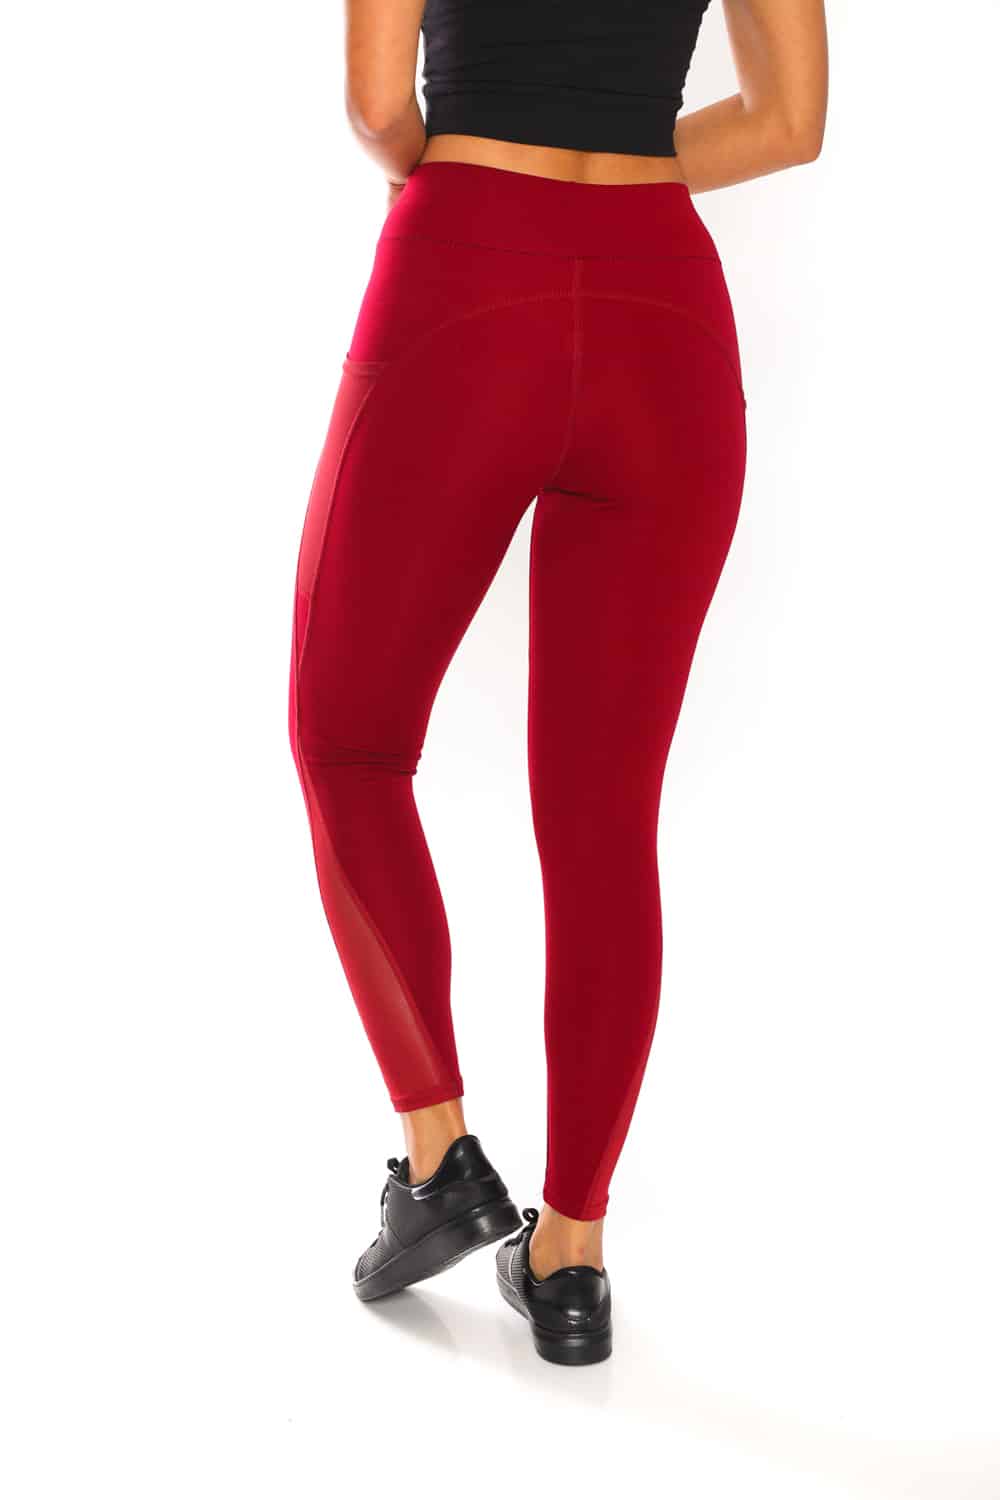 Old Navy Go Dry Elevate High Waisted Cropped Mesh Leggings Red Small - $17  - From Megan